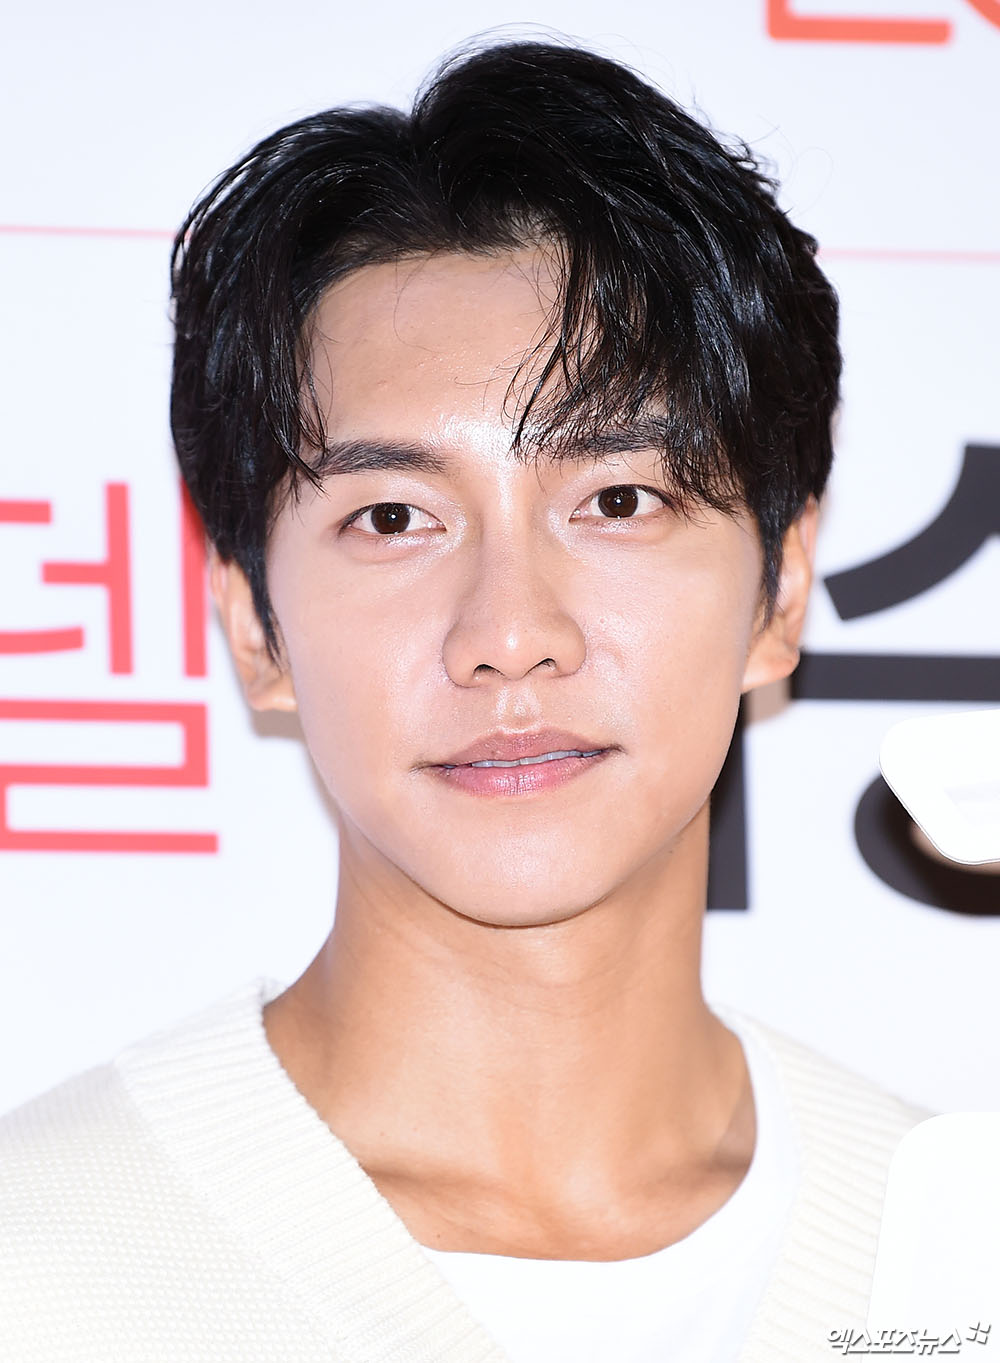 Singer and actor Lee Seung-gi has declared war on the flammer.Lee Seung-gis agency, Hook Entertainment, said on the official SNS on the 28th, We decided that the act of indiscreet evil and flammer against Lee Seung-gi, our artist, reached a level that can not be tolerated anymore.He explained that he handed over the data on flaming and netizens collected on the 26th.Earlier, the agency filed more than 100 complaints in July 2016, and a large number of distributors were fined.The agency said, All of the netizens appealed for the righteousness at the time, but the law did not punish them for one thing. He said, We will continue to respond to the law in the future, and there will be no consultation or goodwill for all activities.Earlier, the management forests belonging to Gong Hyo-jin and Bae Suzy also predicted a hard-line response to flaming.In addition, many singers and actors are showing a decisive attitude toward the flammer.Lee Seung-gi also pulled out a knife for the flammer in line with this trend, and the netizens are also welcoming both hands to this hard-line response.Photo = DB